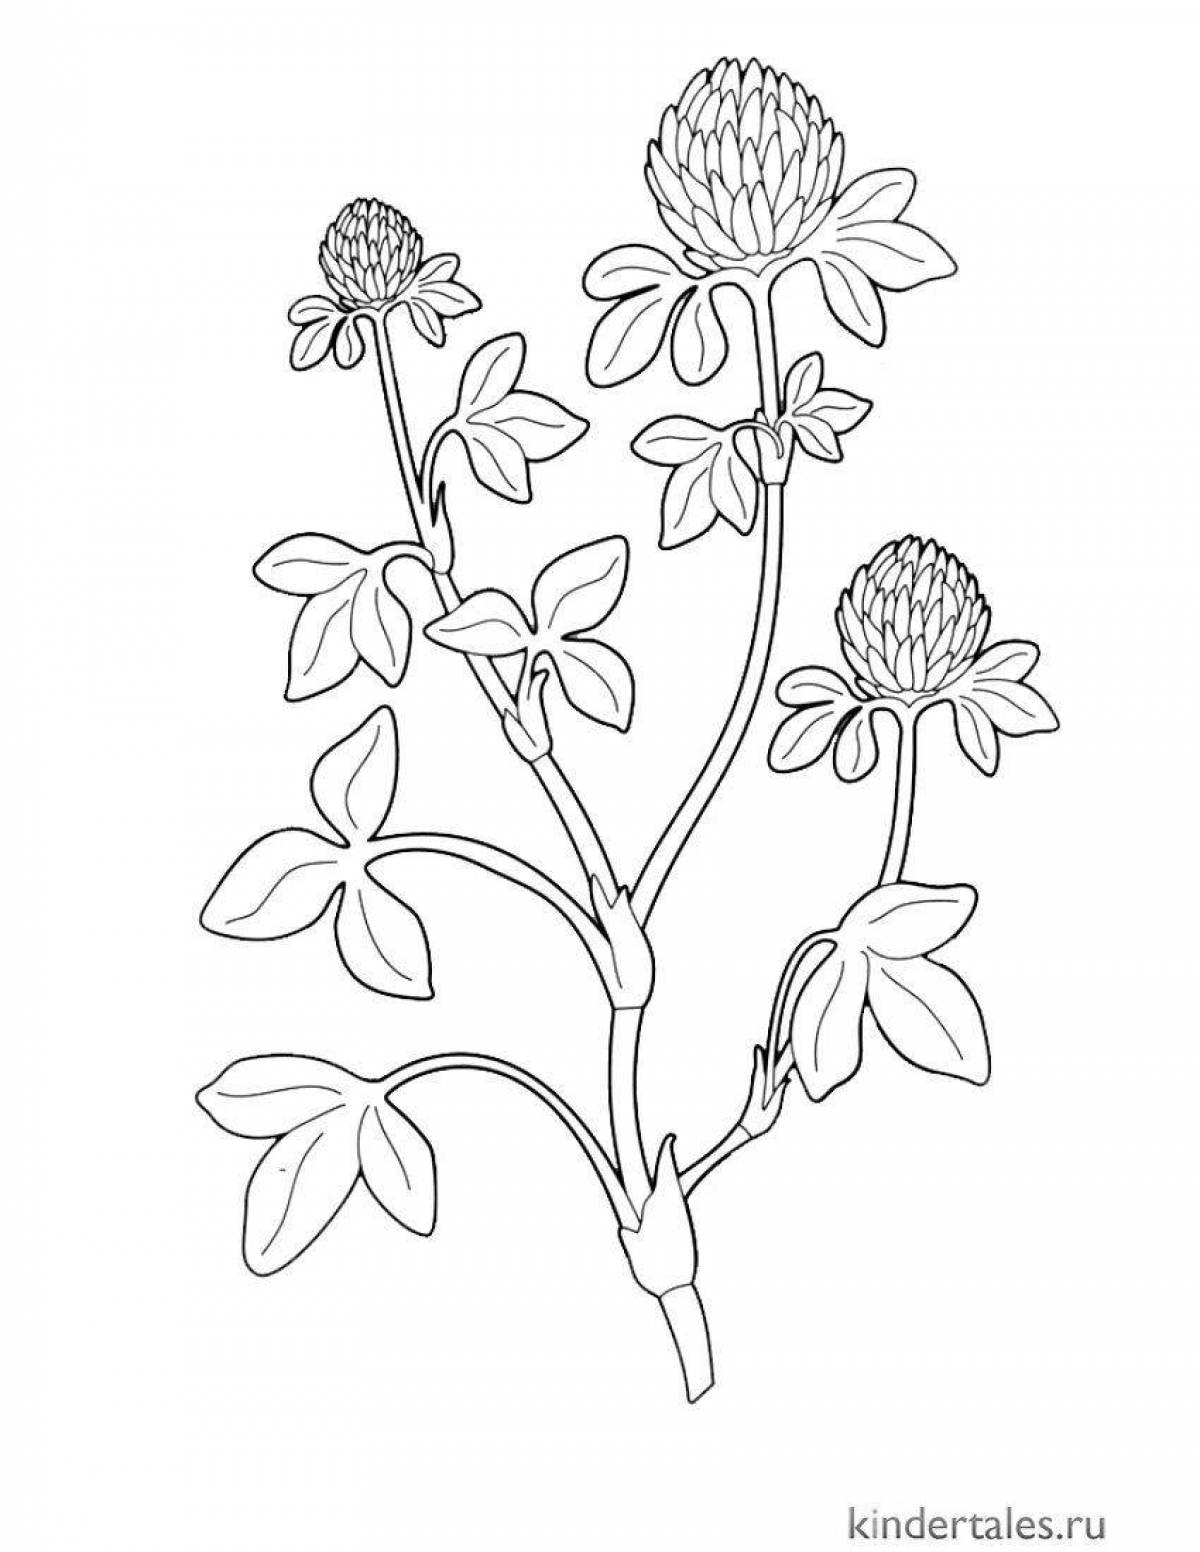 Coloring book jubilant wildflowers for children